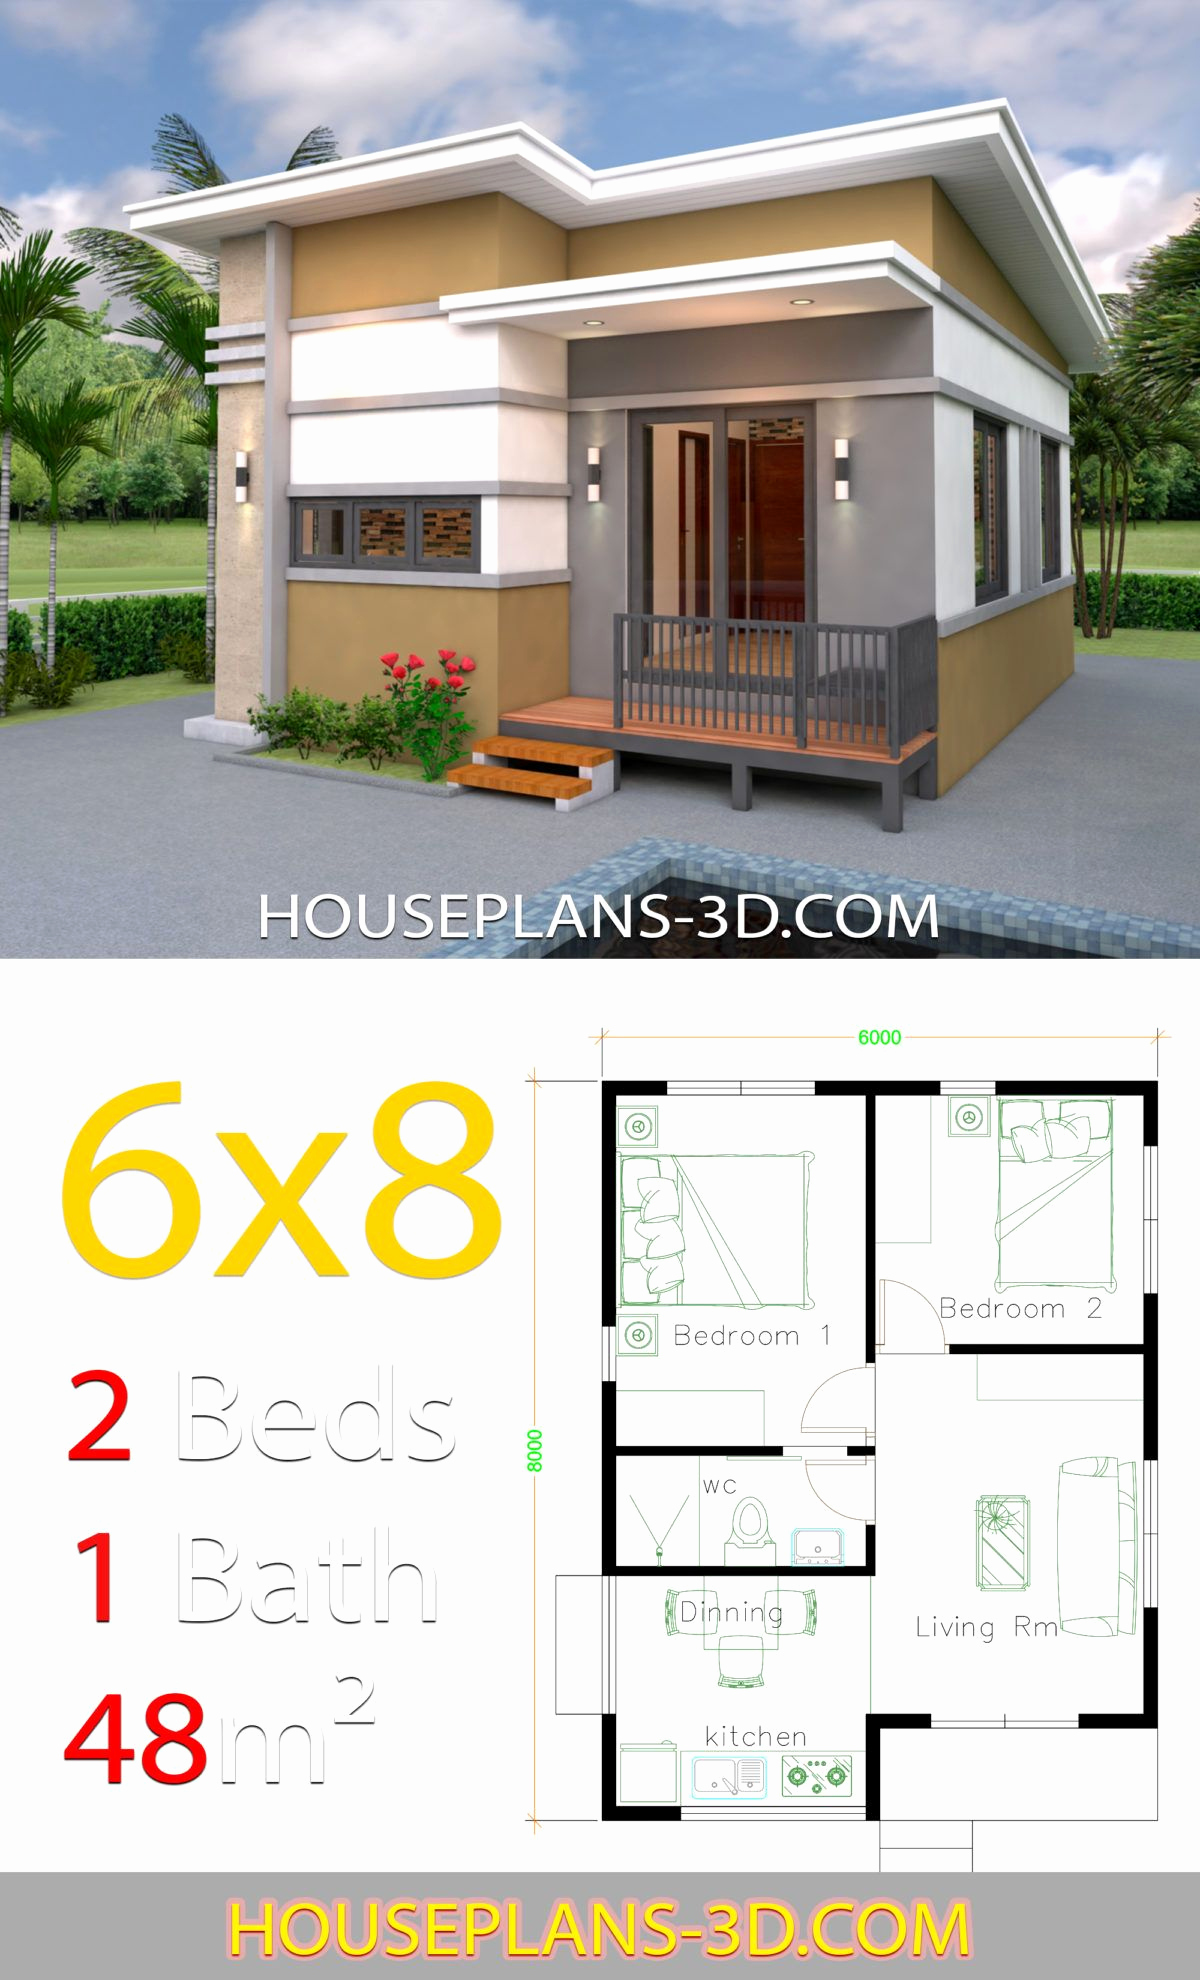 2 Bedroom House Plans Beautiful House Design 6x8 with 2 Bedrooms